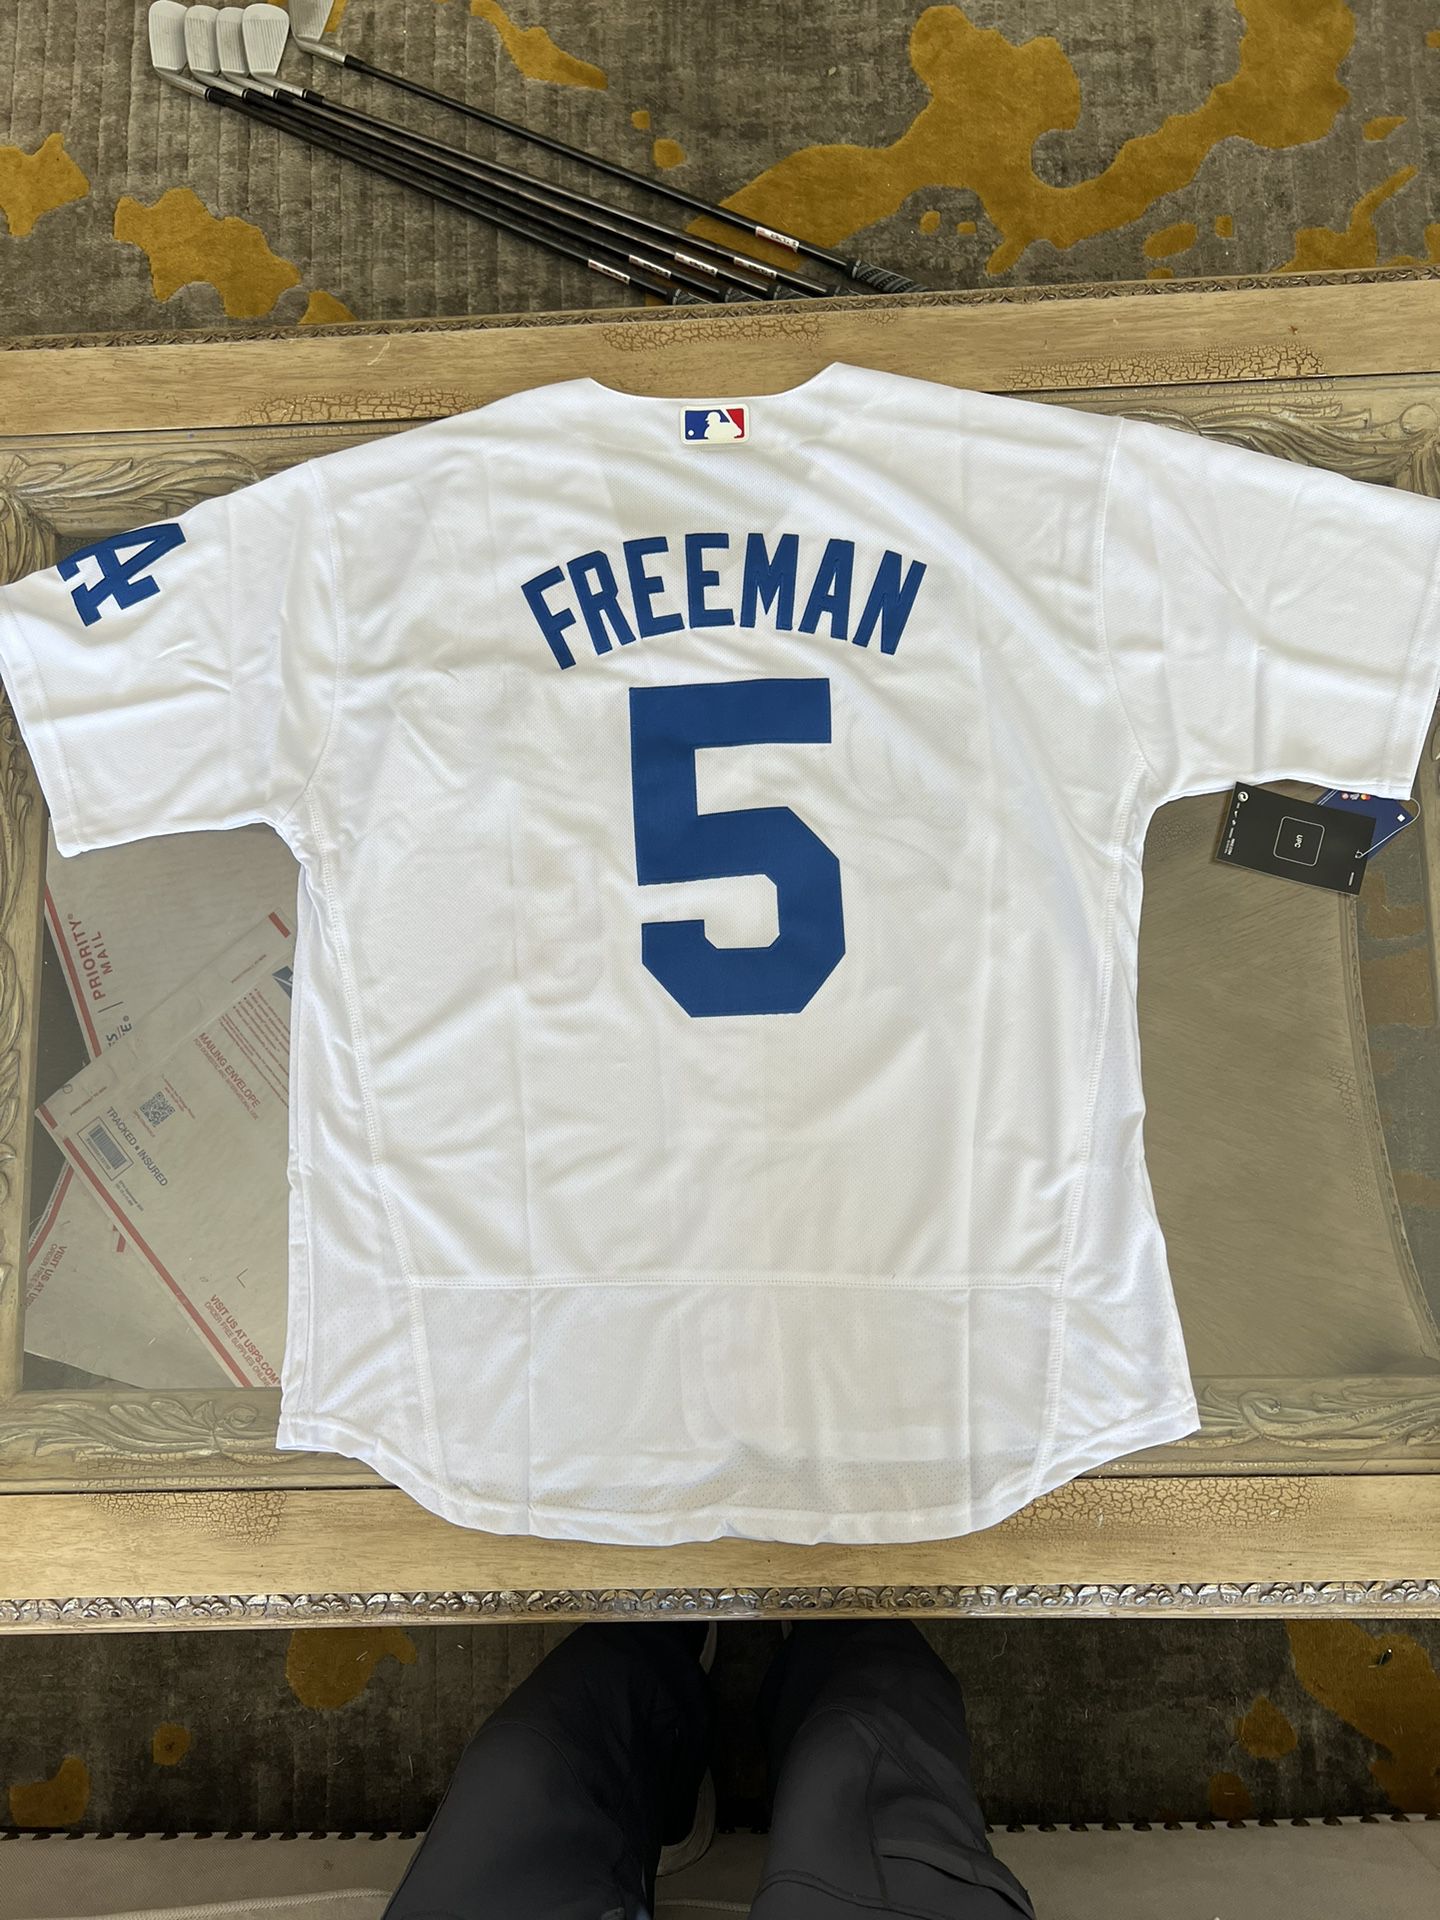 Nike Authentic Dodgers Freddie Freeman Jersey for Sale in Pasadena, CA -  OfferUp